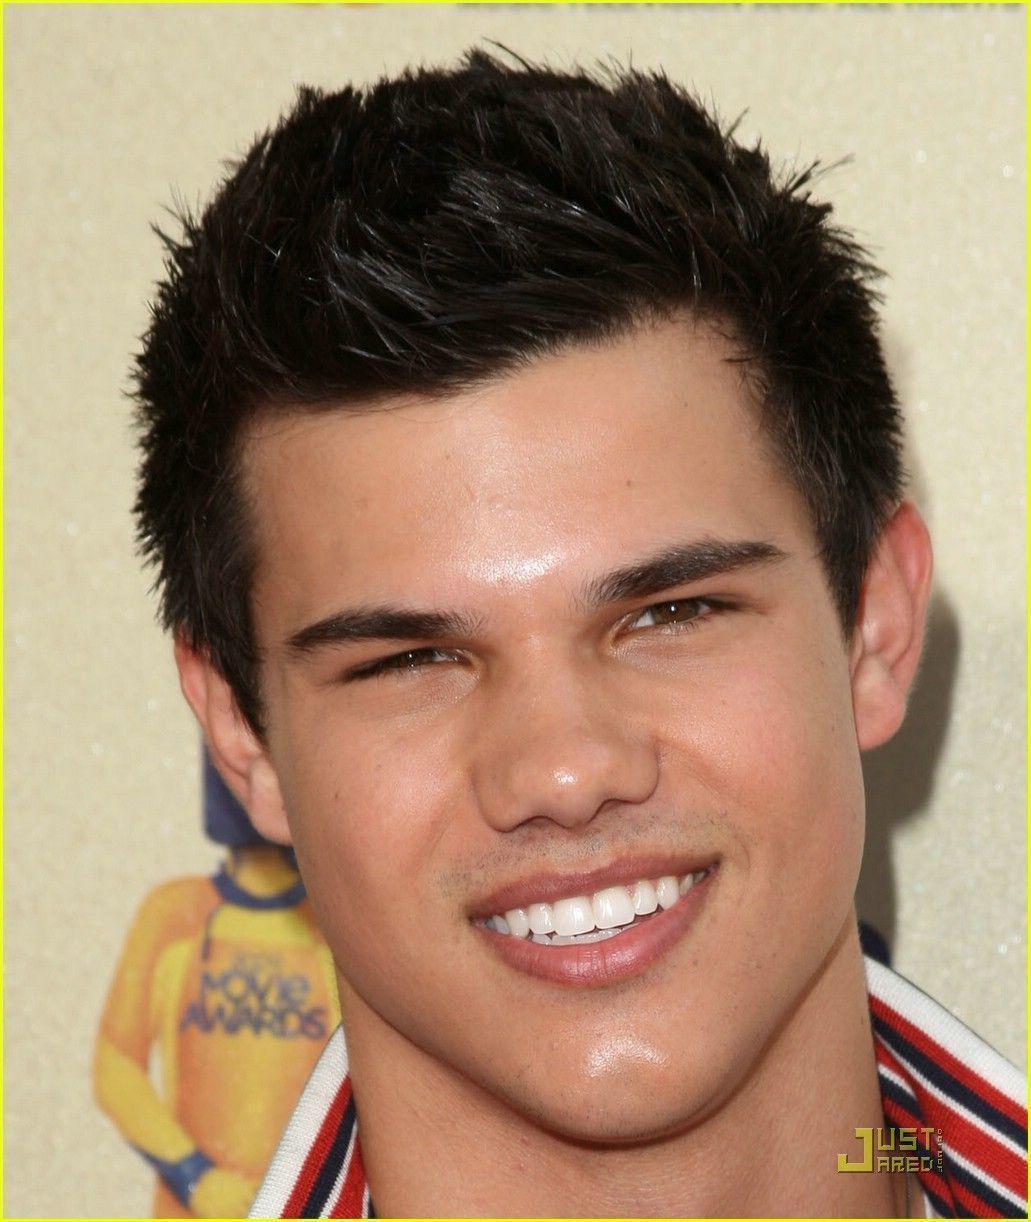 Taylor Lautner Shirtless Image Amp Pictures Becuo